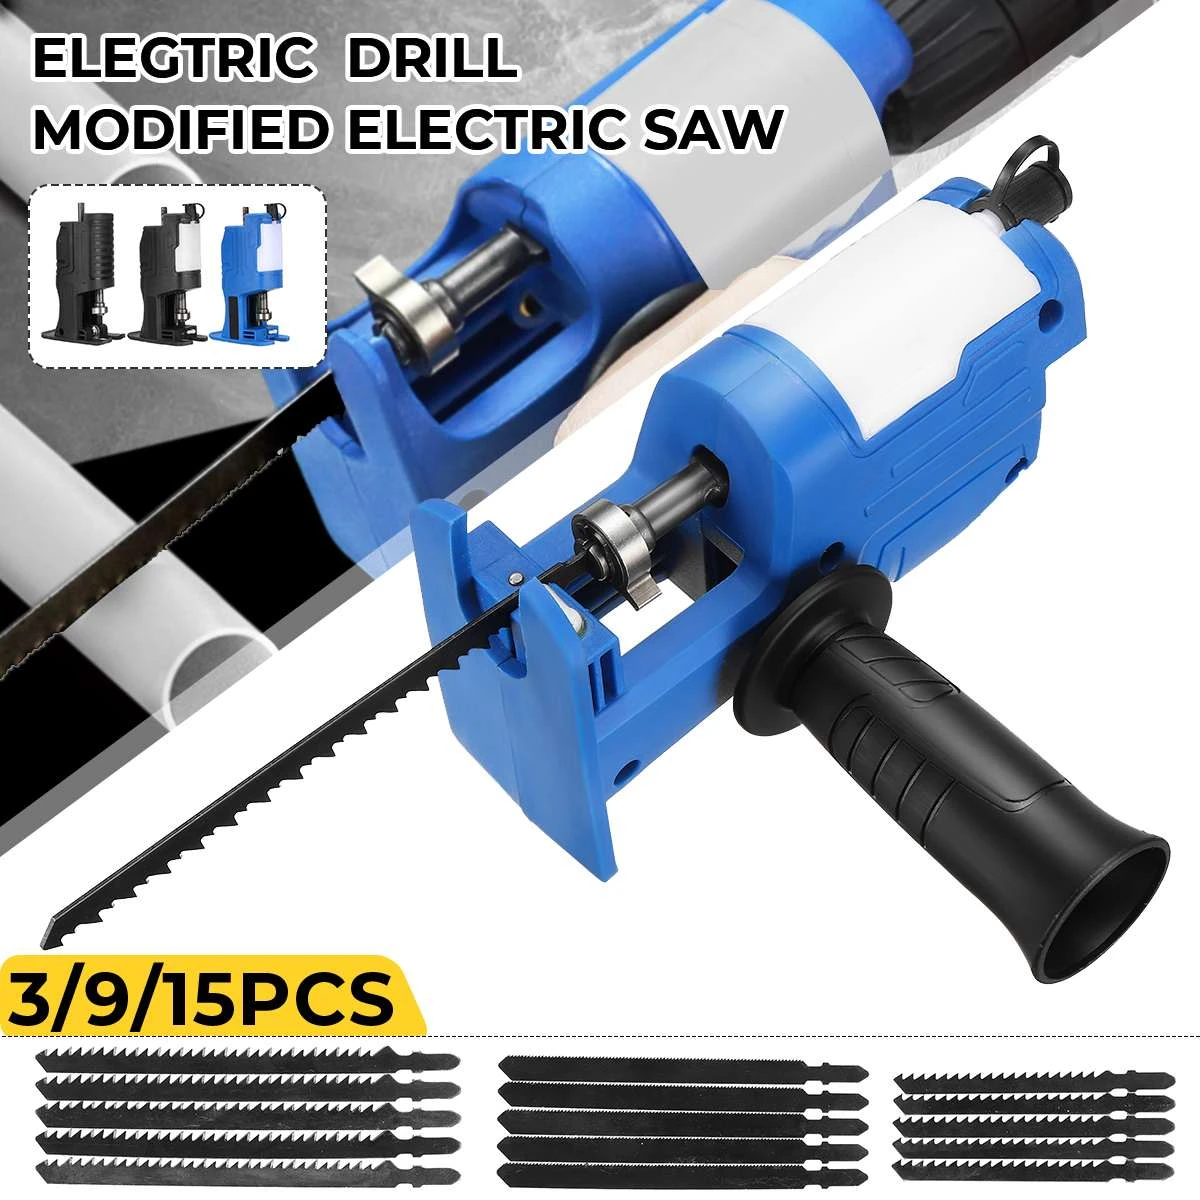 New! Cordless Reciprocating Saw Adapter Electric Drill Modified Electric Saw Hand Tool Wood Metal Cutter Saw Attachment Adapter